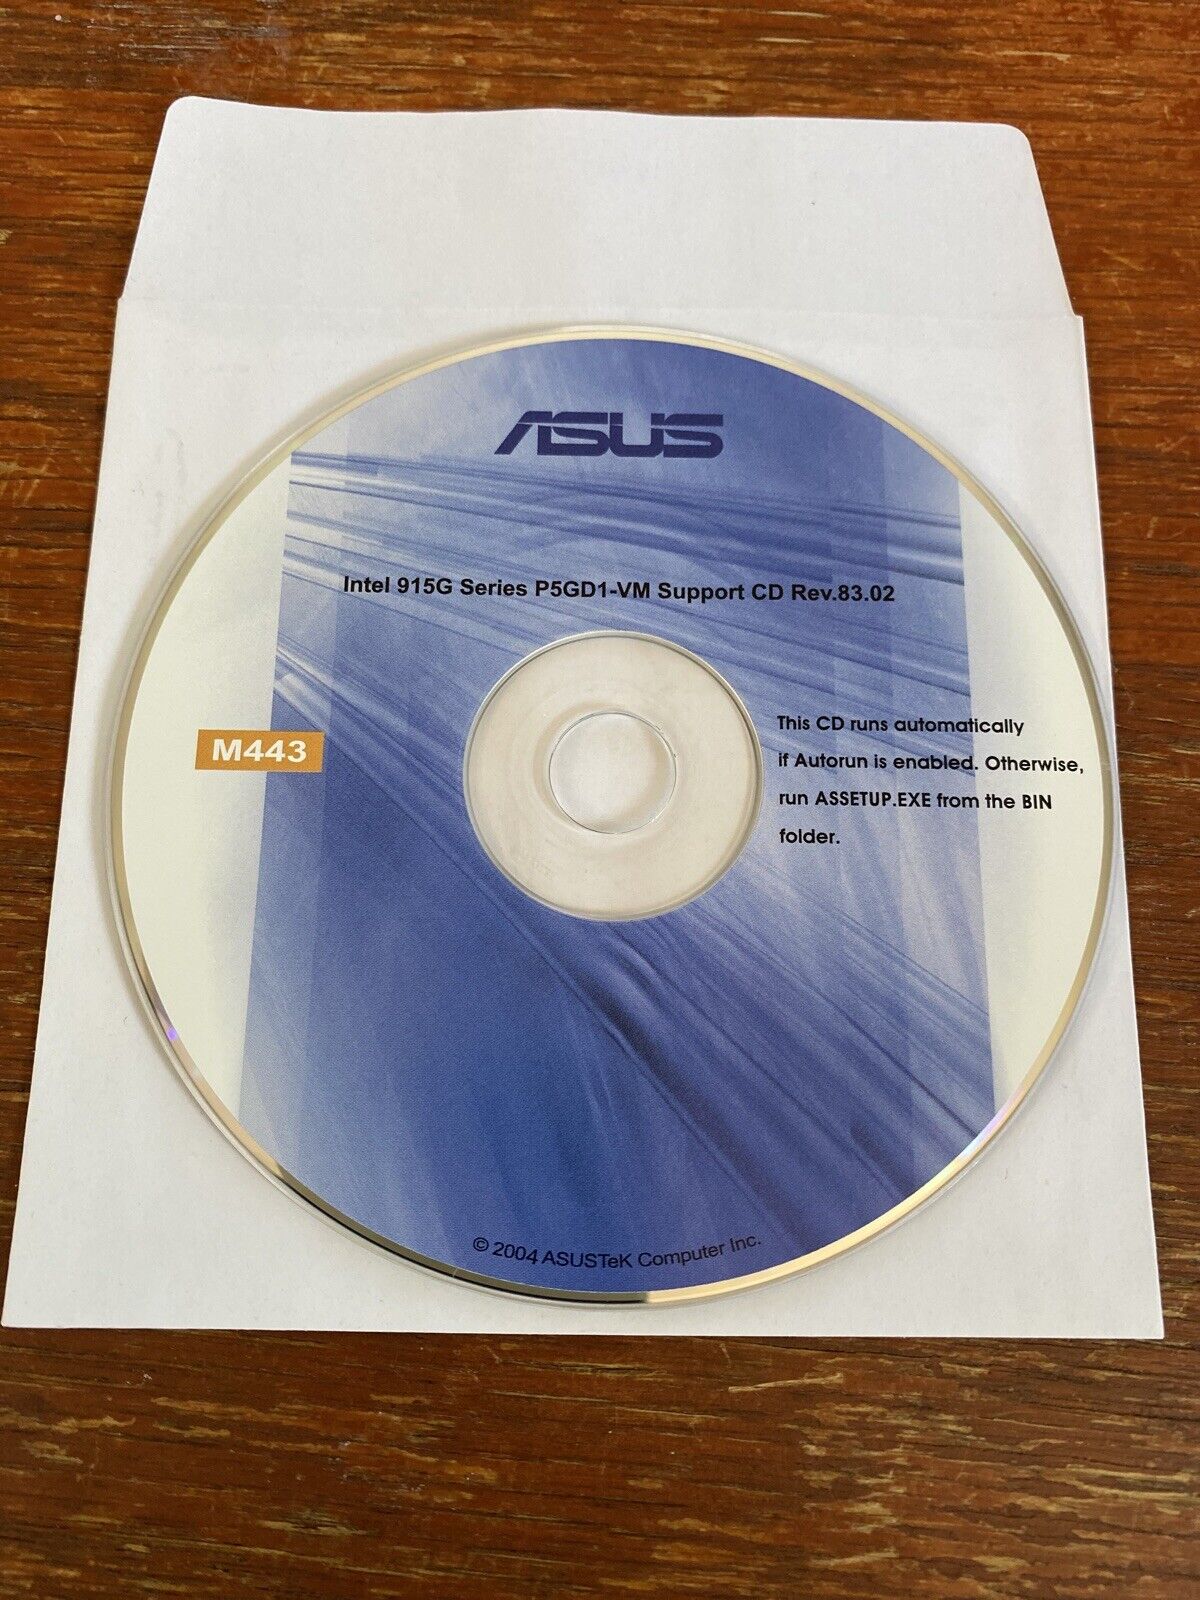 Asus P5gd1-vm Support Cd M443